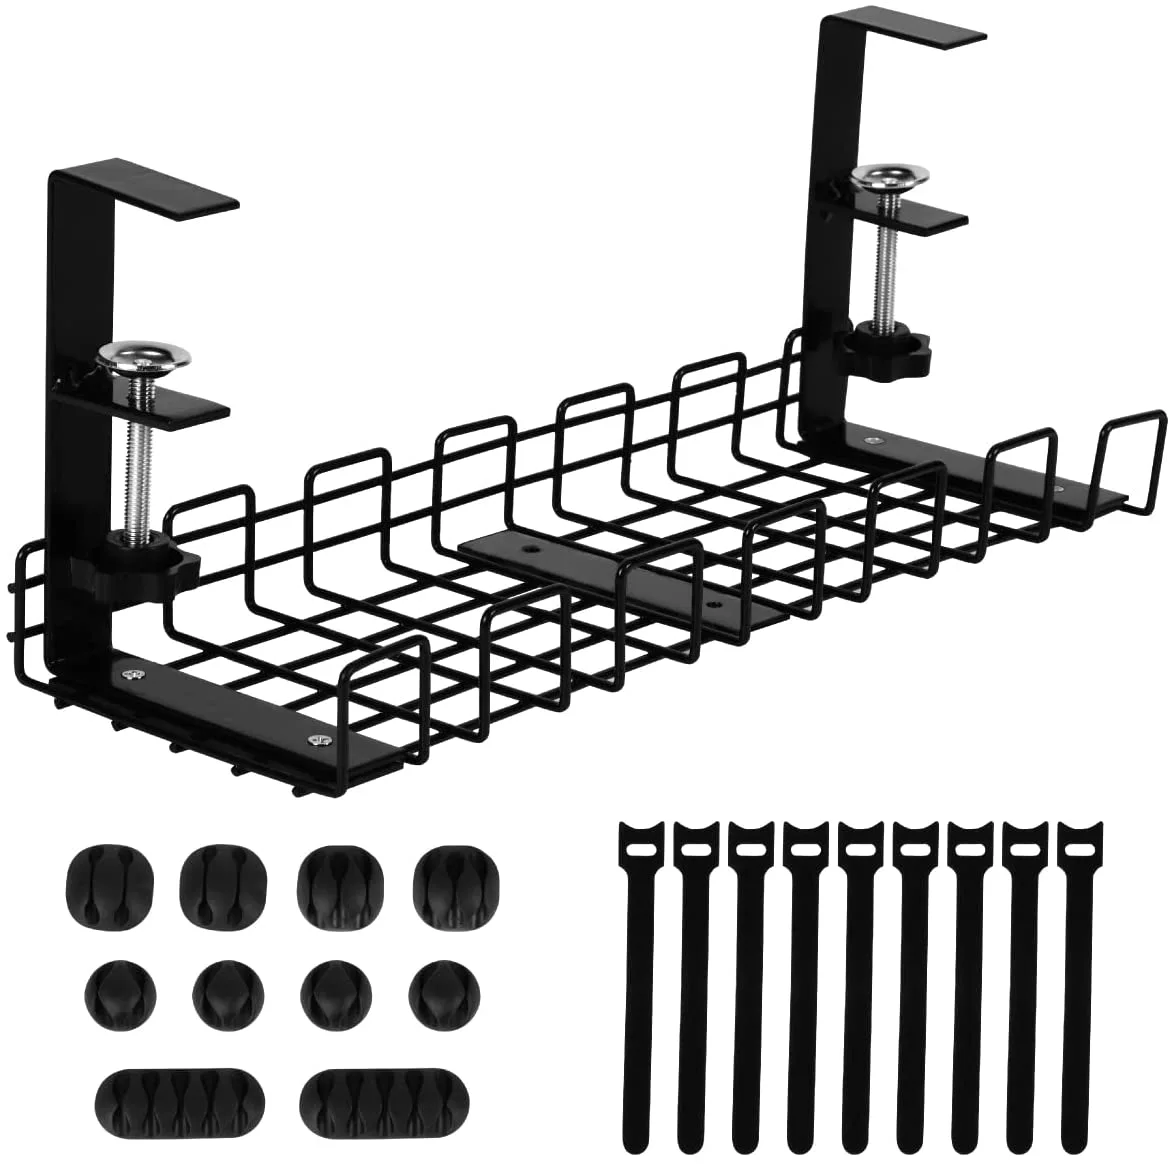 Buy cable tray under desk,desk cable management tray on Surealong